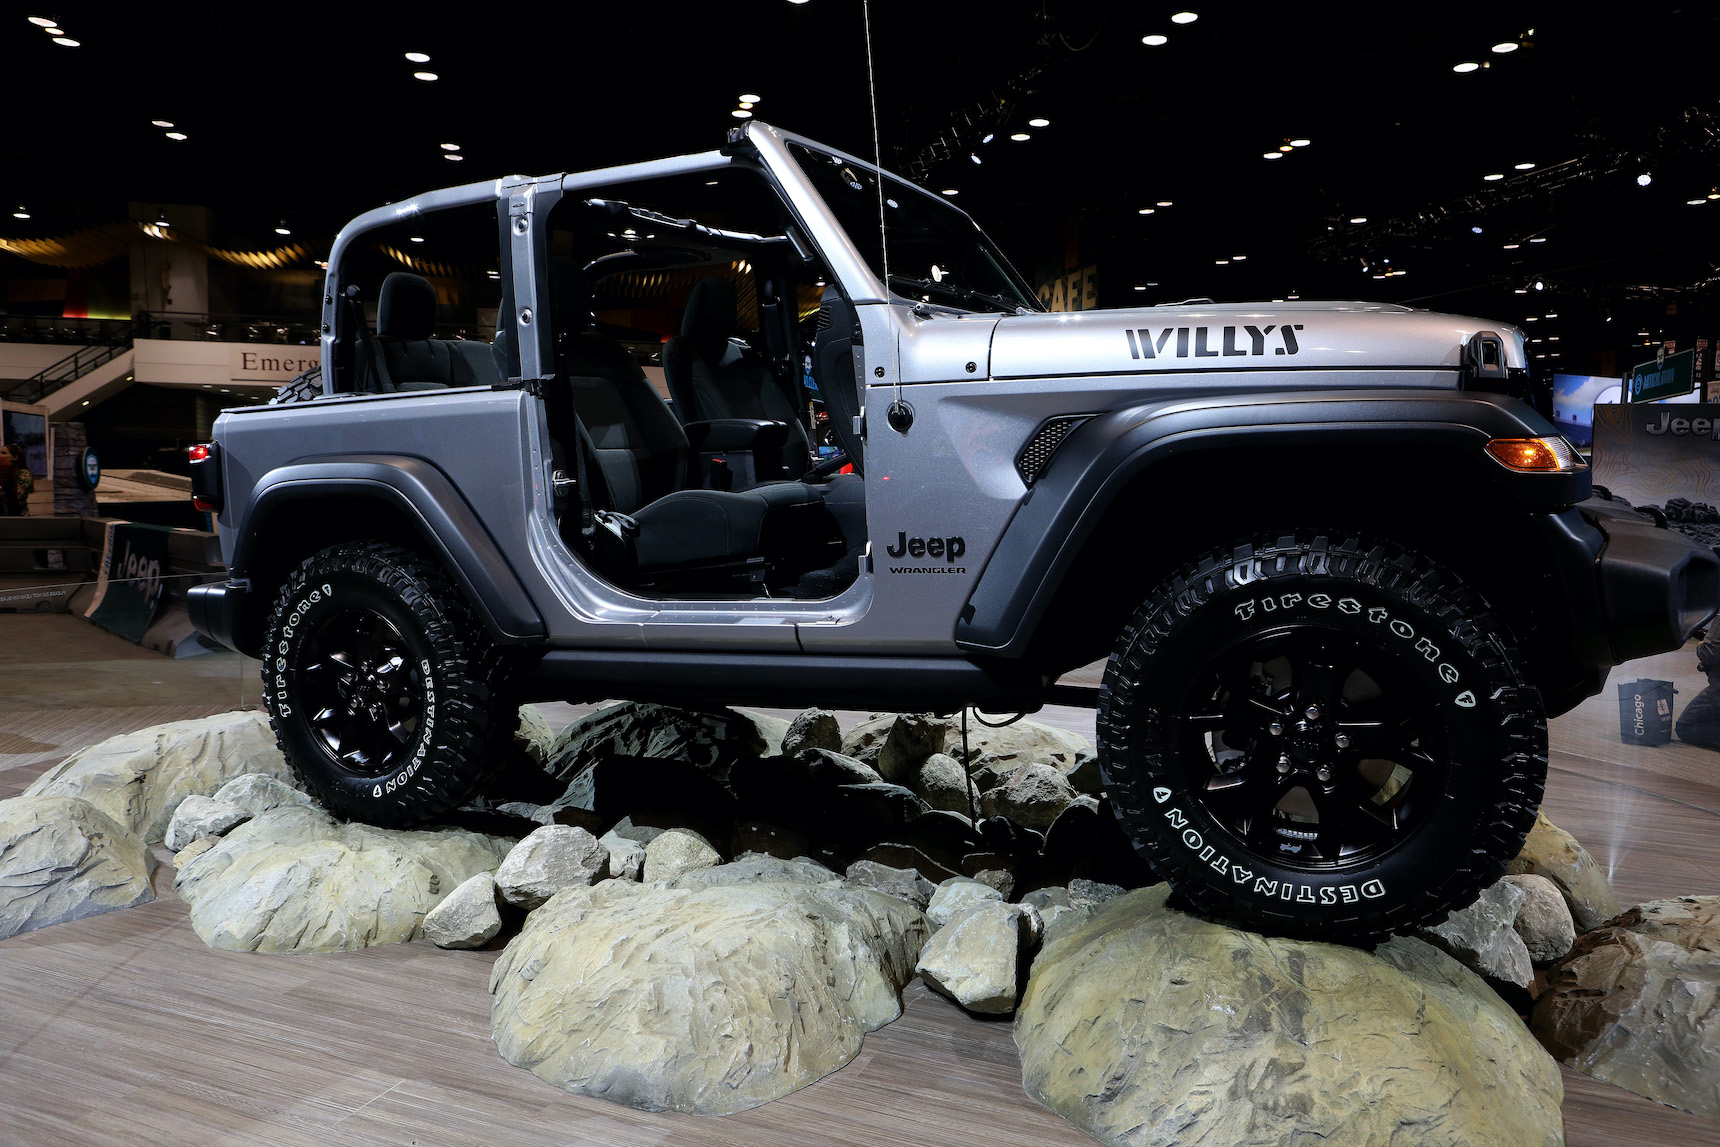 2020 Jeep Wrangler, a chief Ford Bronco rival, is on display at the 112th Annual Chicago Auto Show